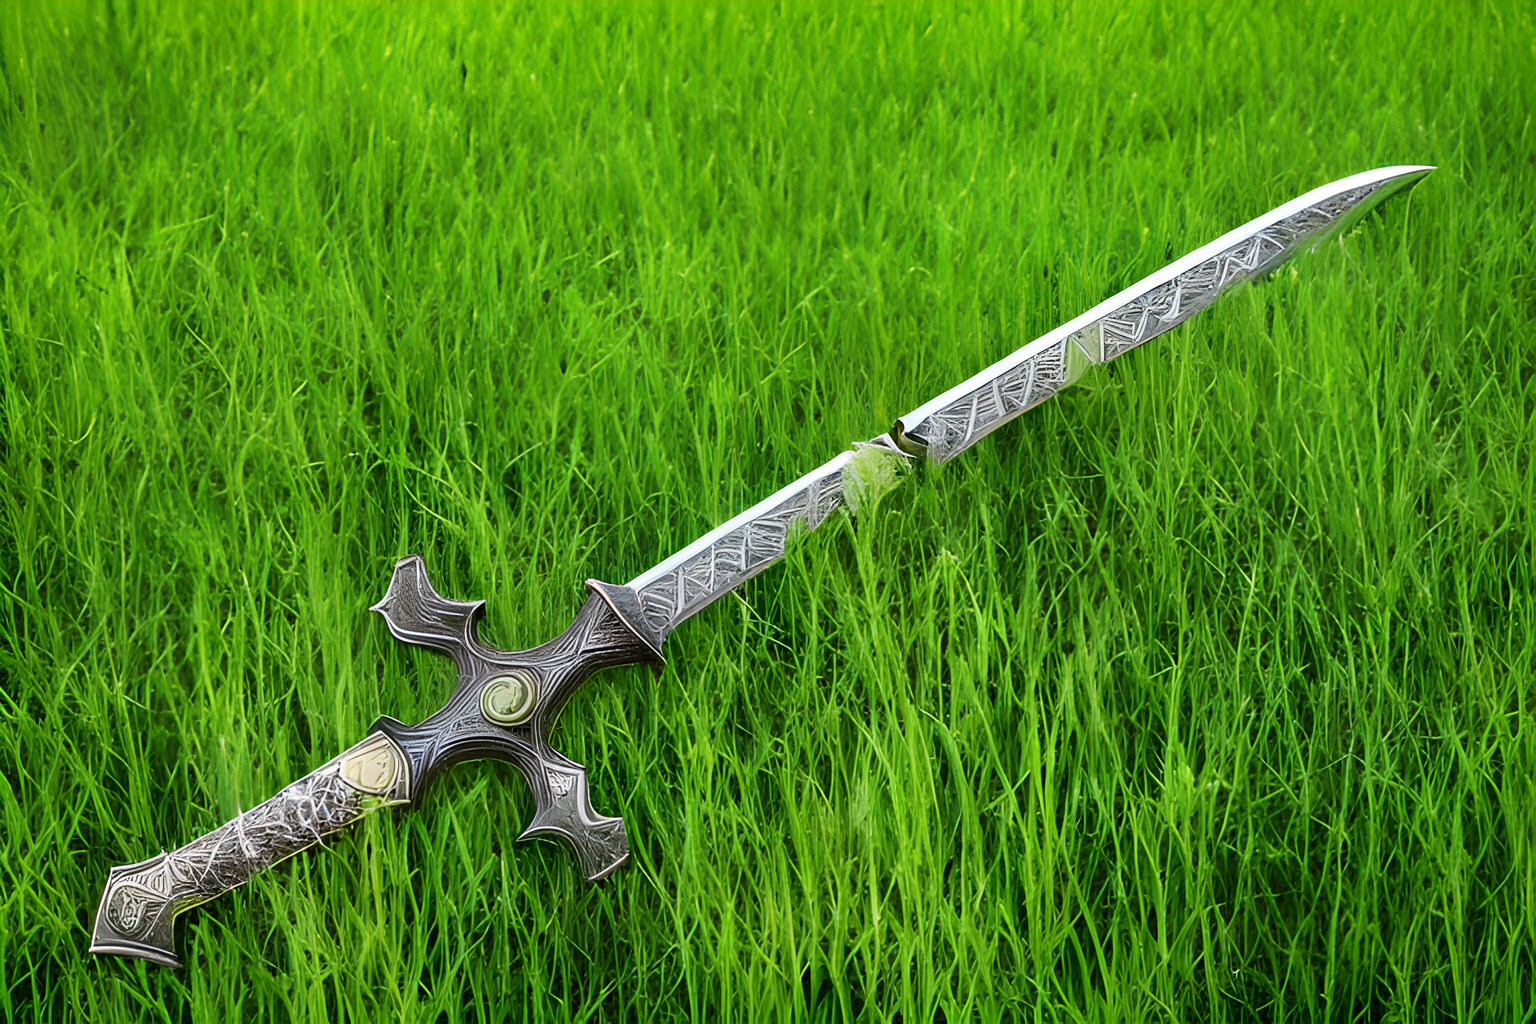 sword on grass produced by stable diffusion image to image